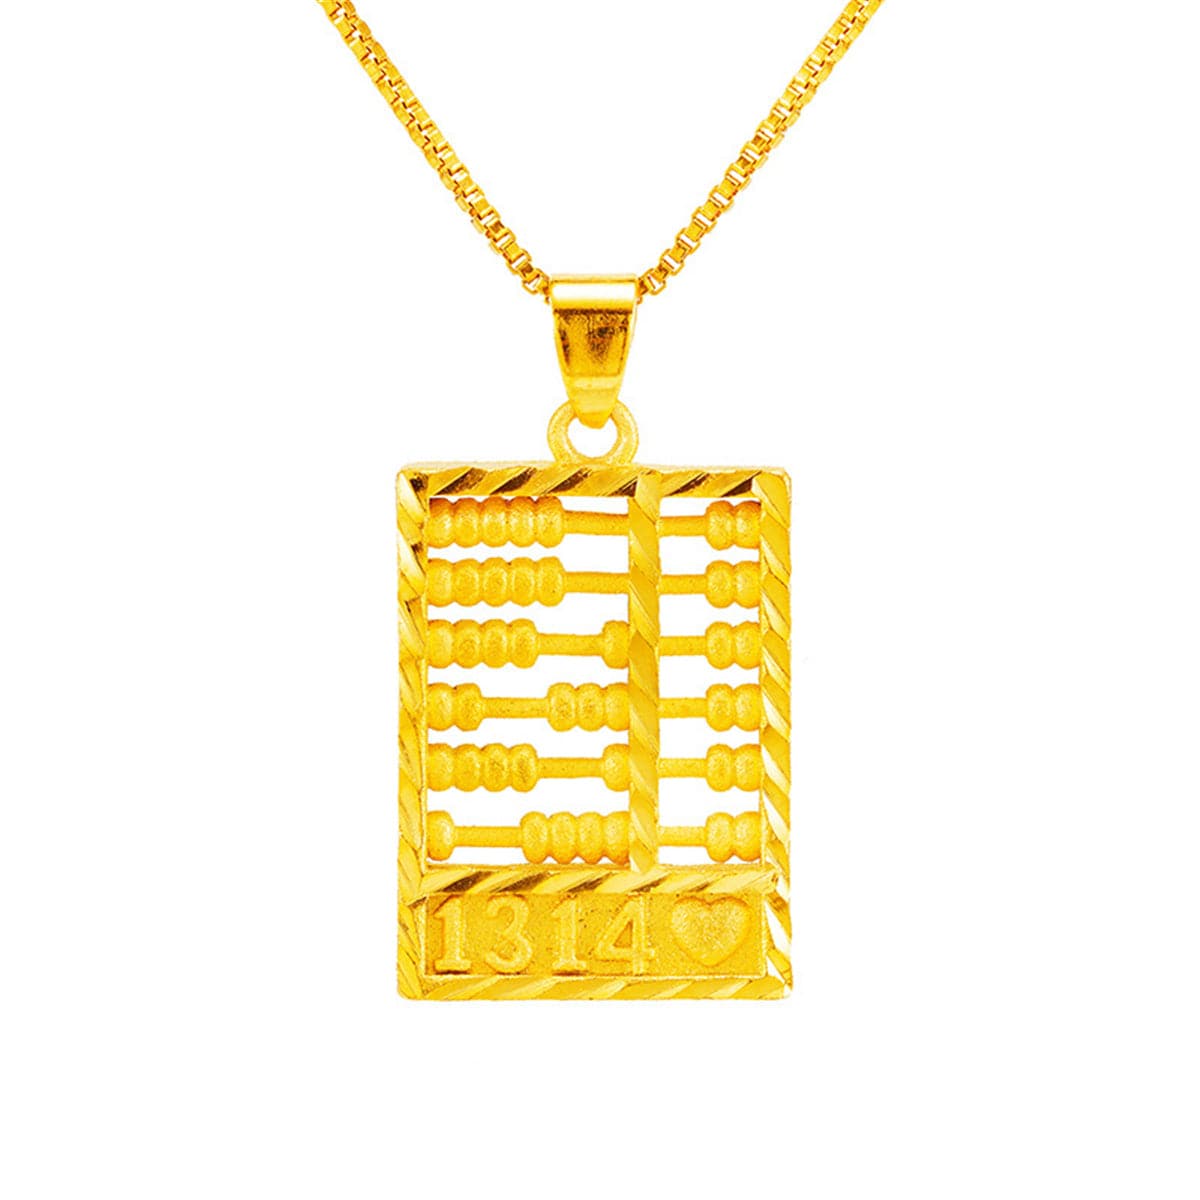 18K Gold-Plated Open Heart Abacus Pendant Necklace